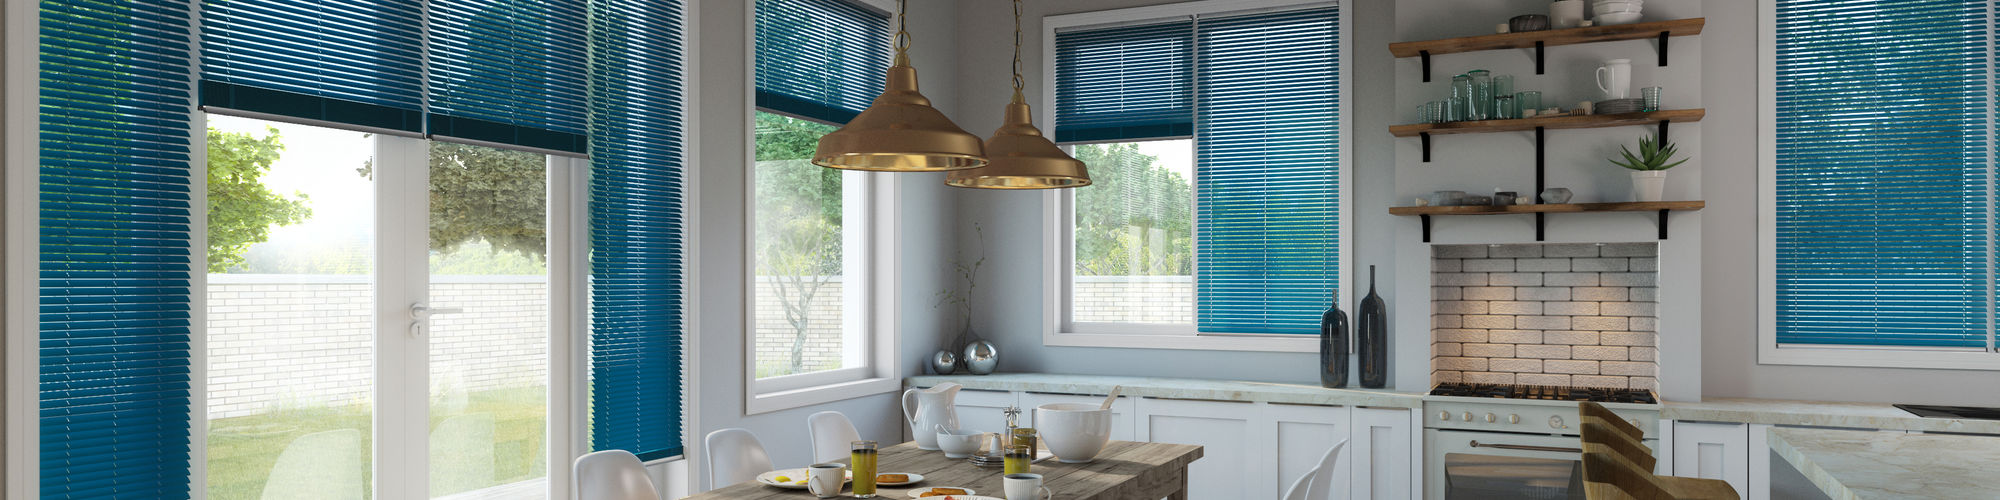 For a blind with a classic design, take a look at the Aluminium Venetian blinds like these blues ones from Blind Revolution.